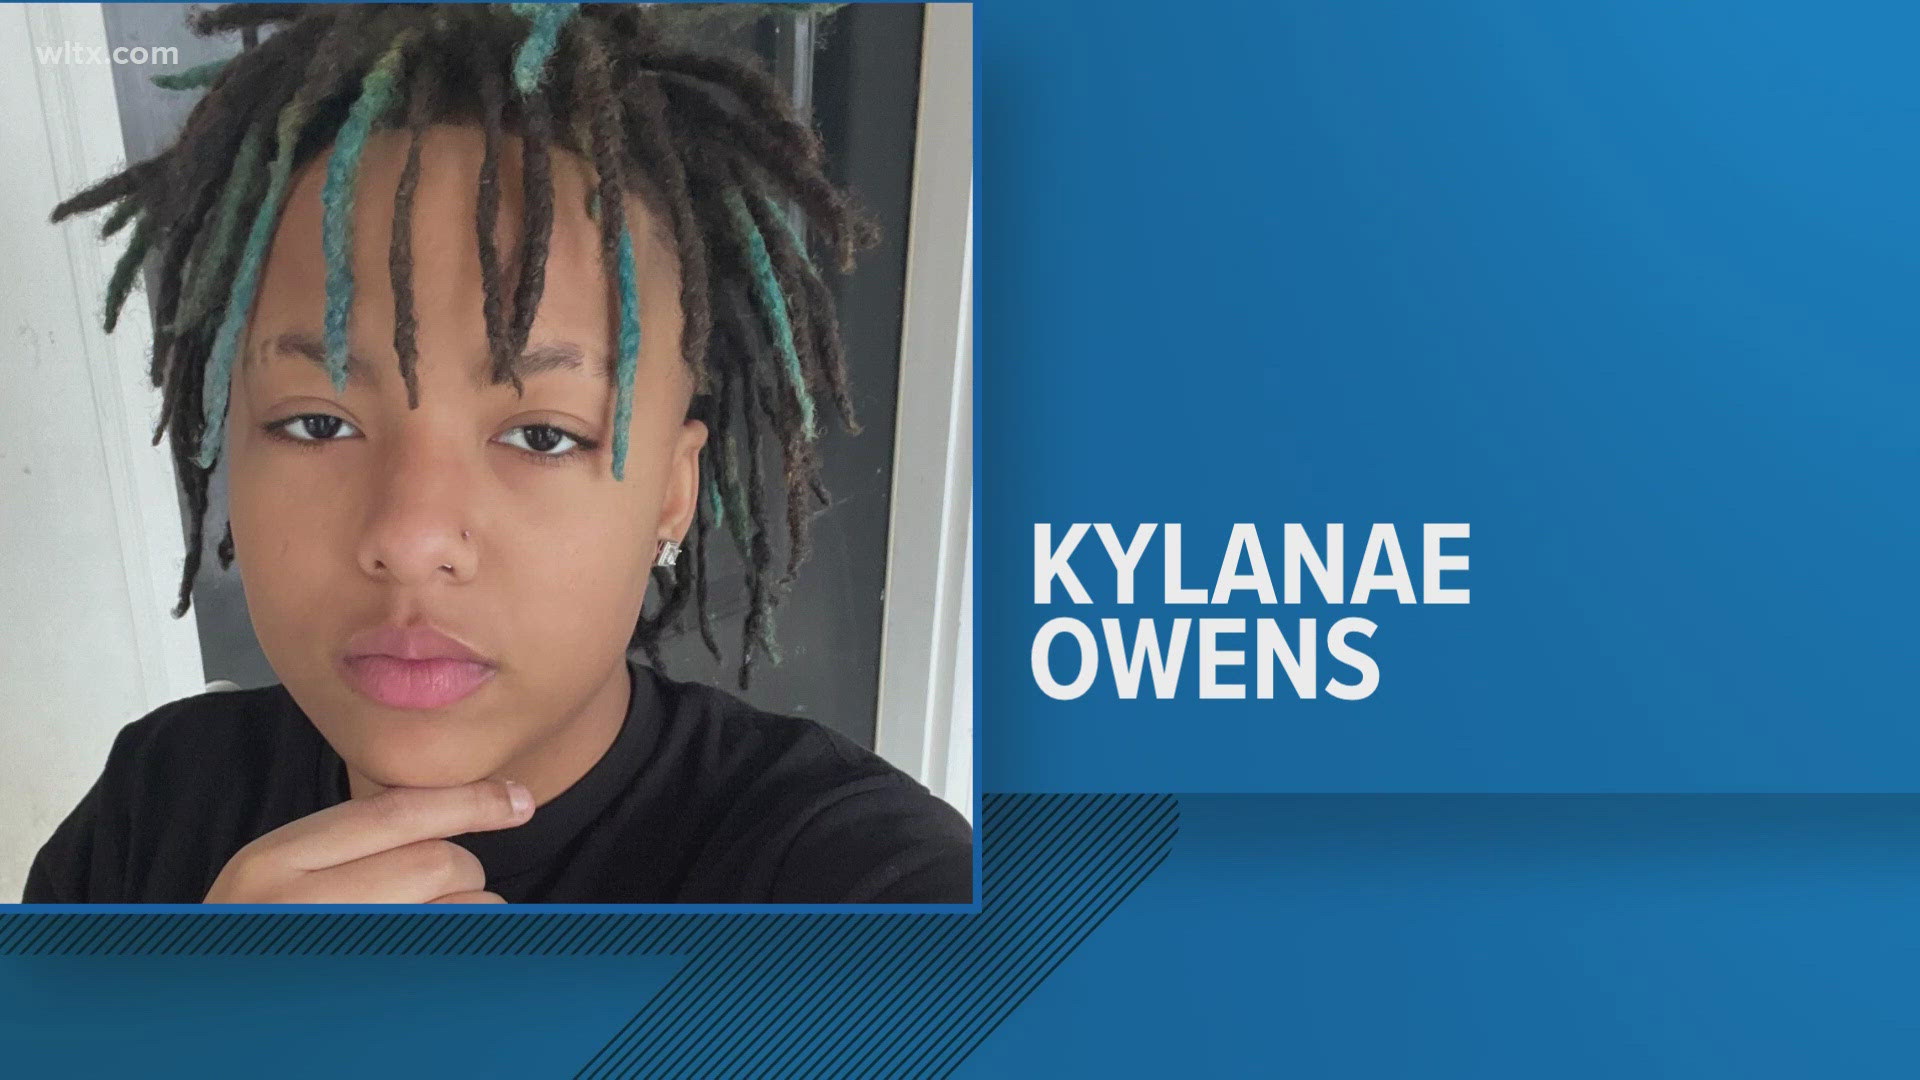 Kylanae Ownes, 16, was last seen around her home on Jubilee driver yesterday afternoon.